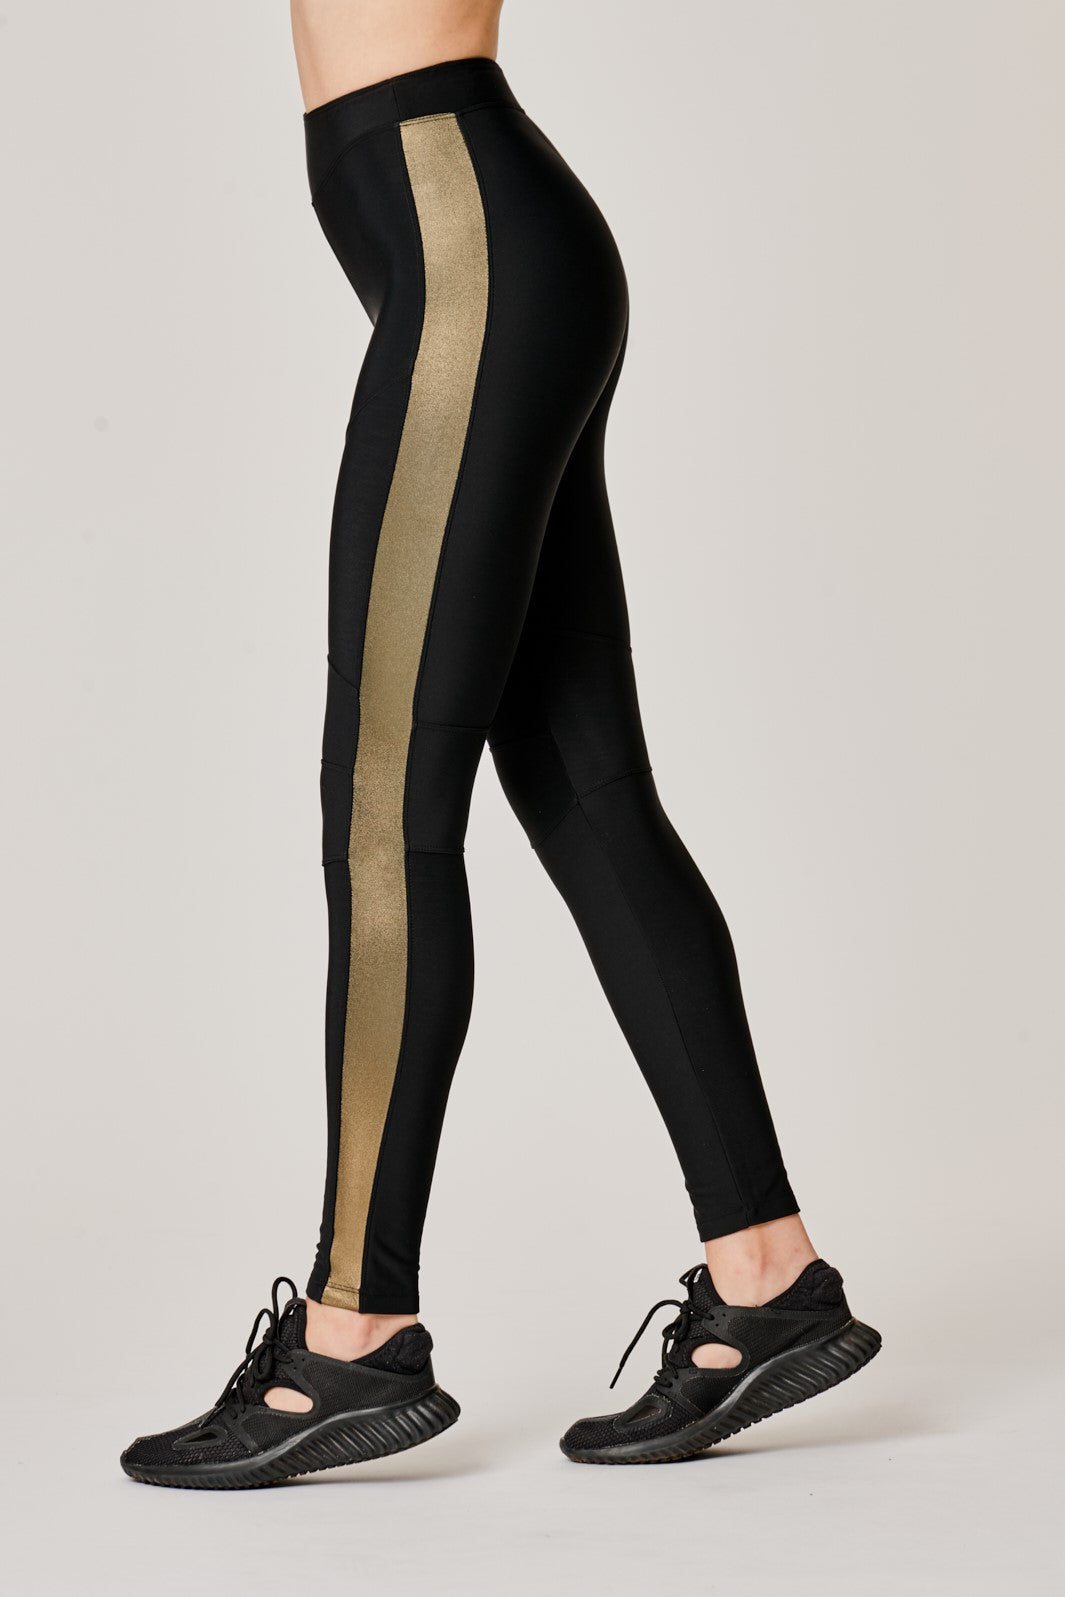 Every Step Of The Way Thick Fleece Leggings- Black – The Pulse Boutique